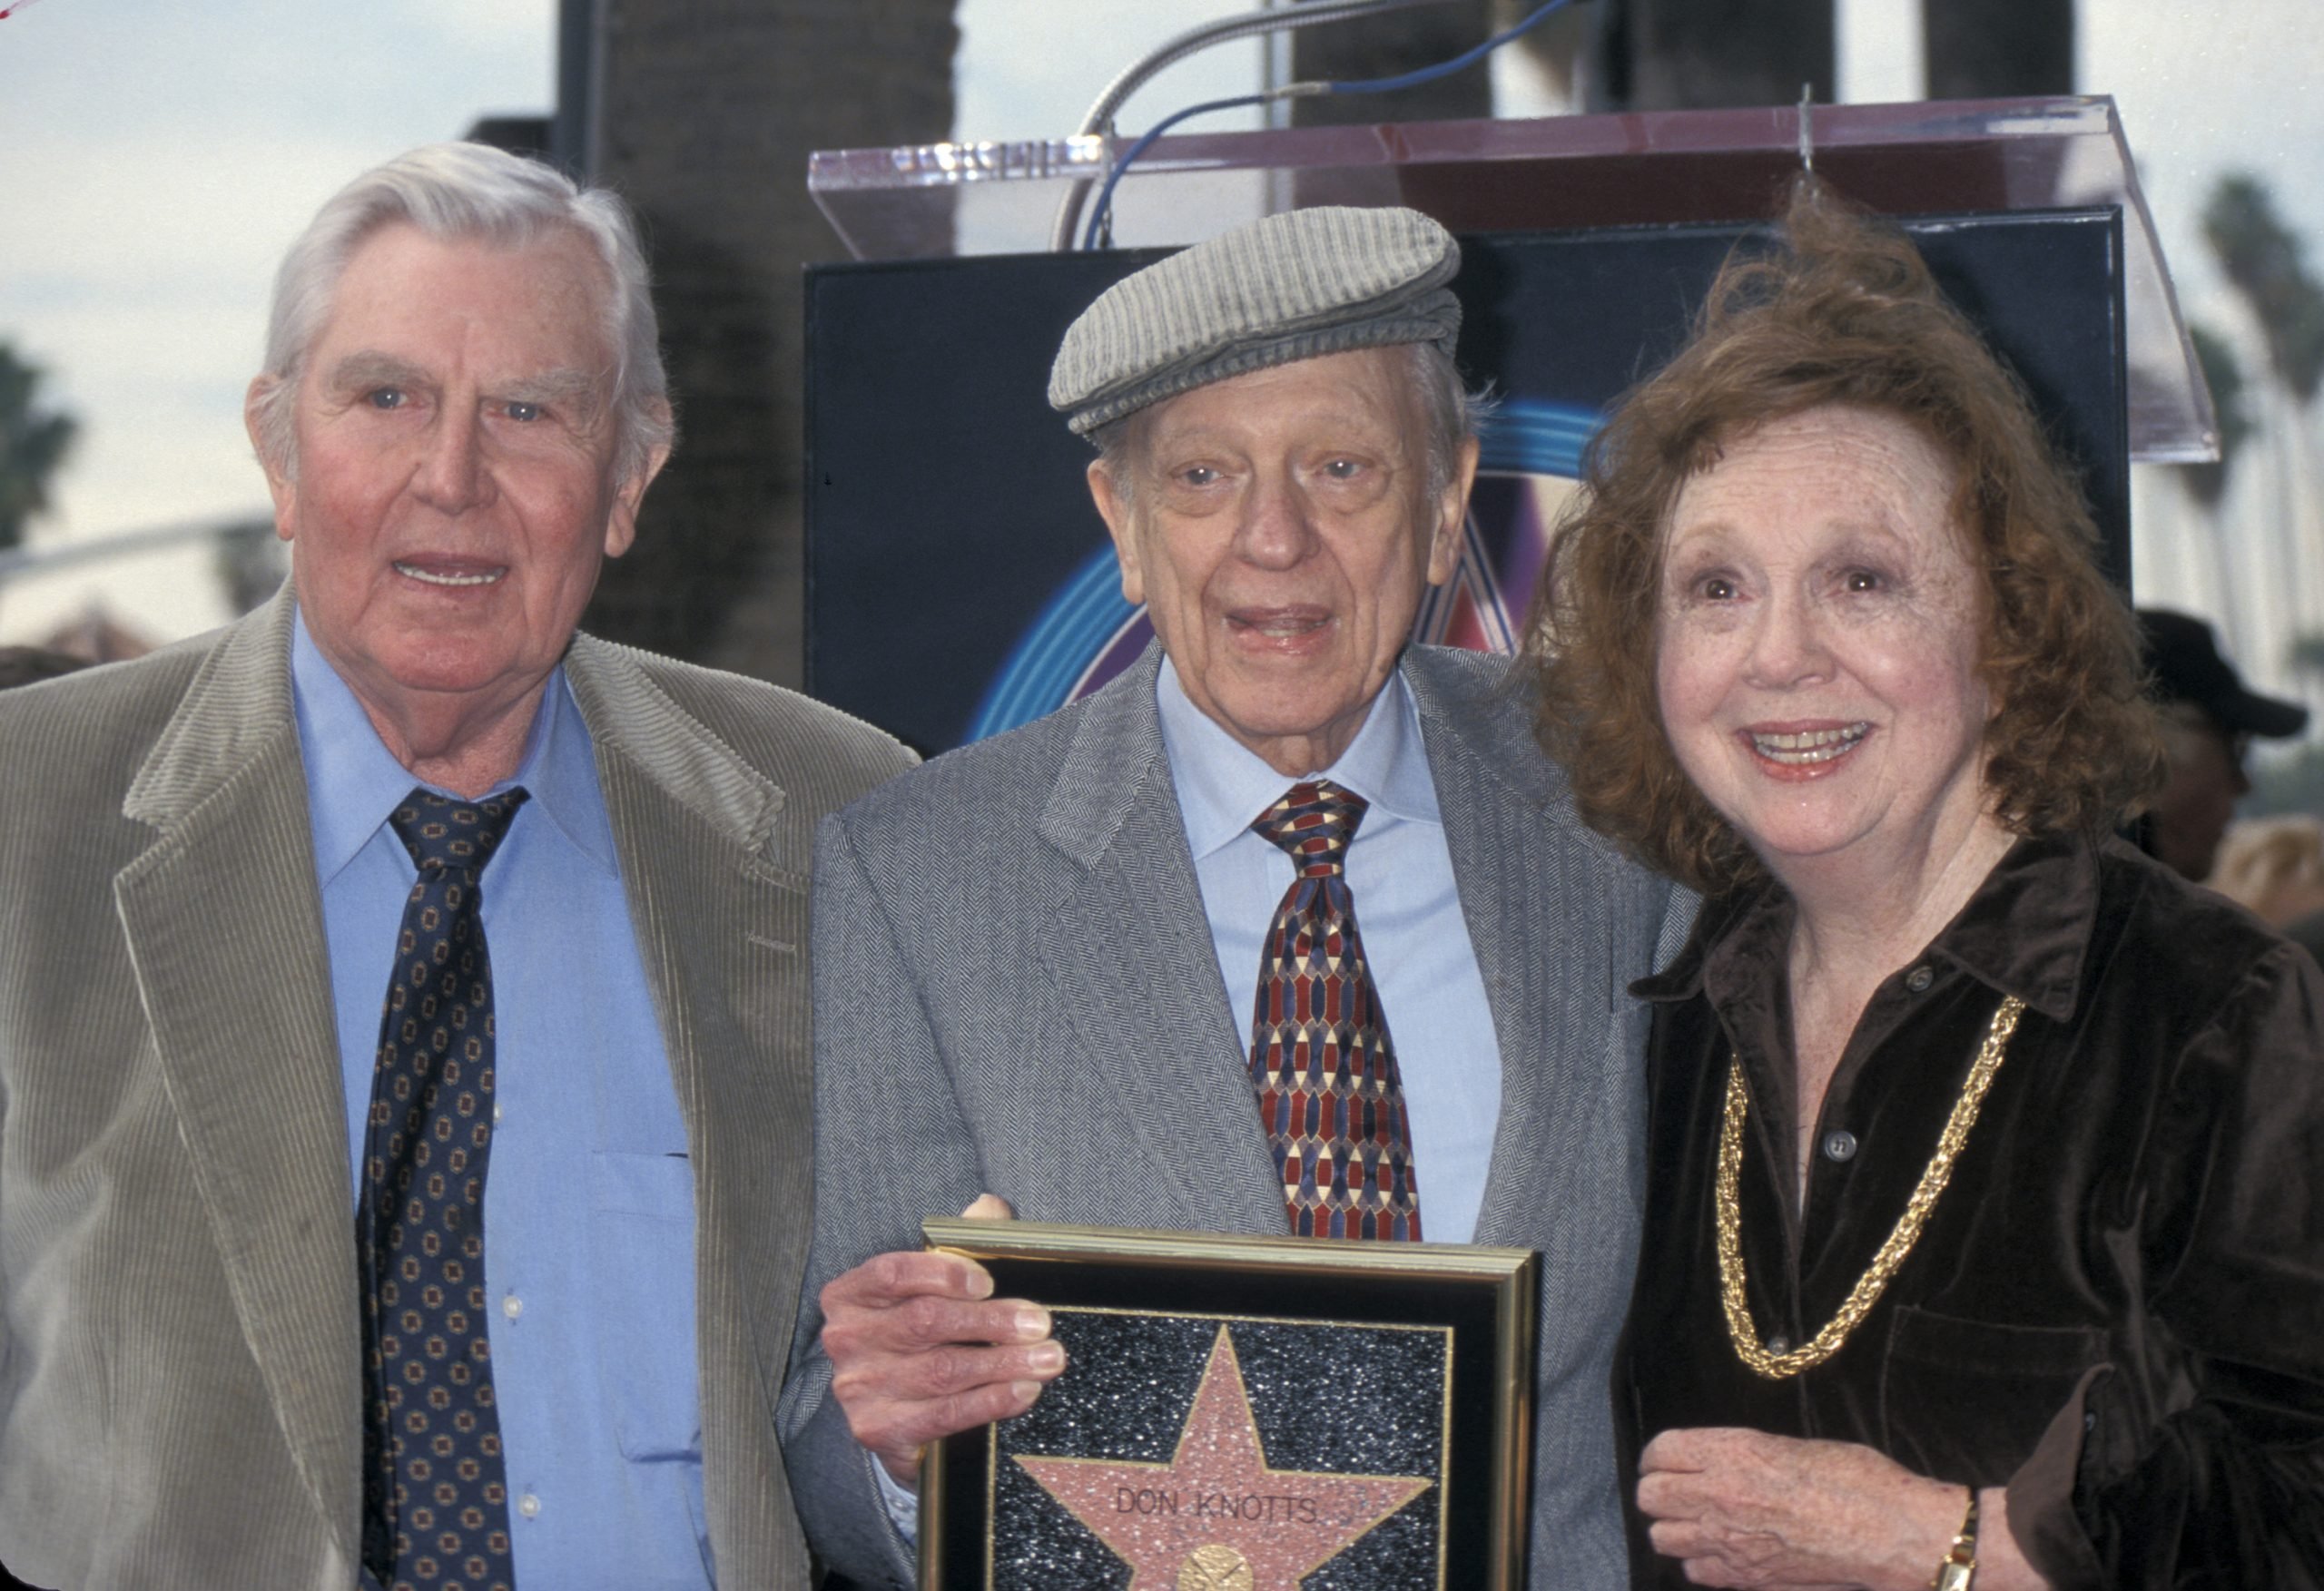 'The Andy Griffith Show' actors Andy Griffith, Don Knotts, and Betty Lynn